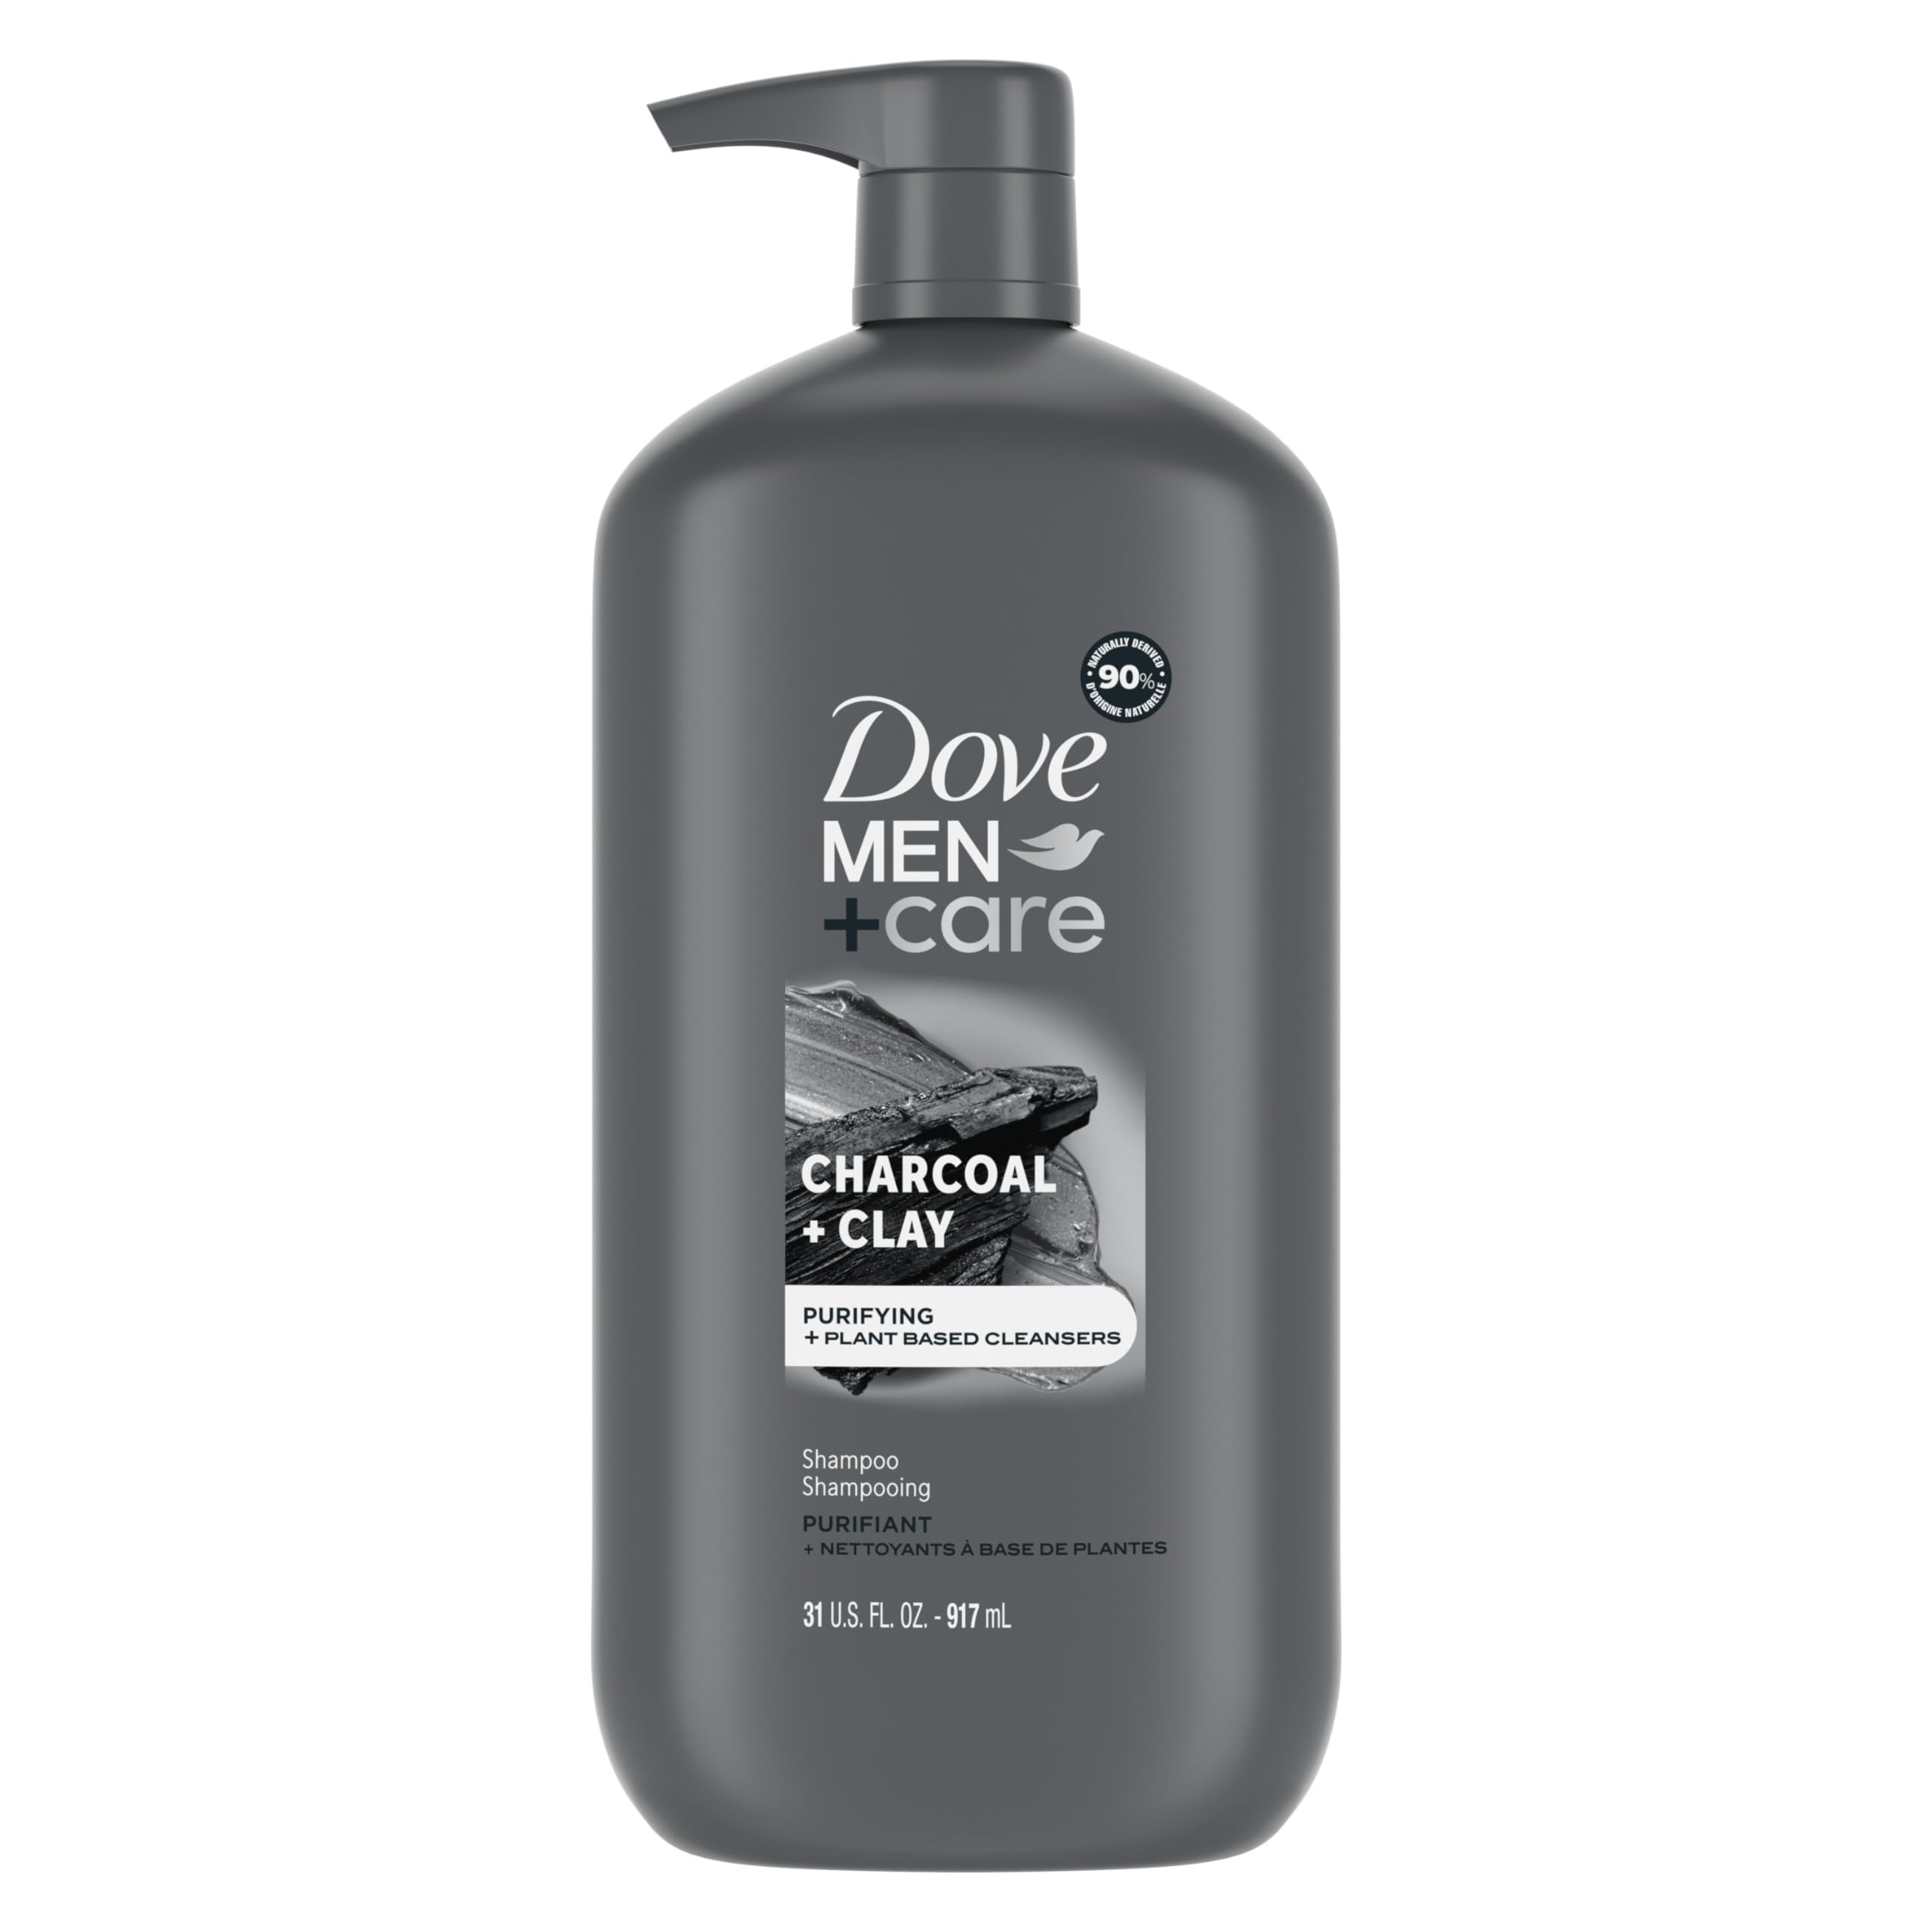 DOVE MEN+CARE DV M SH Charcoal 4p 31z Pump Purifying Shampoo Charcoal + Clay for Stronger, More Resilient Hair, with Plant-Based Cleansers, 31 oz